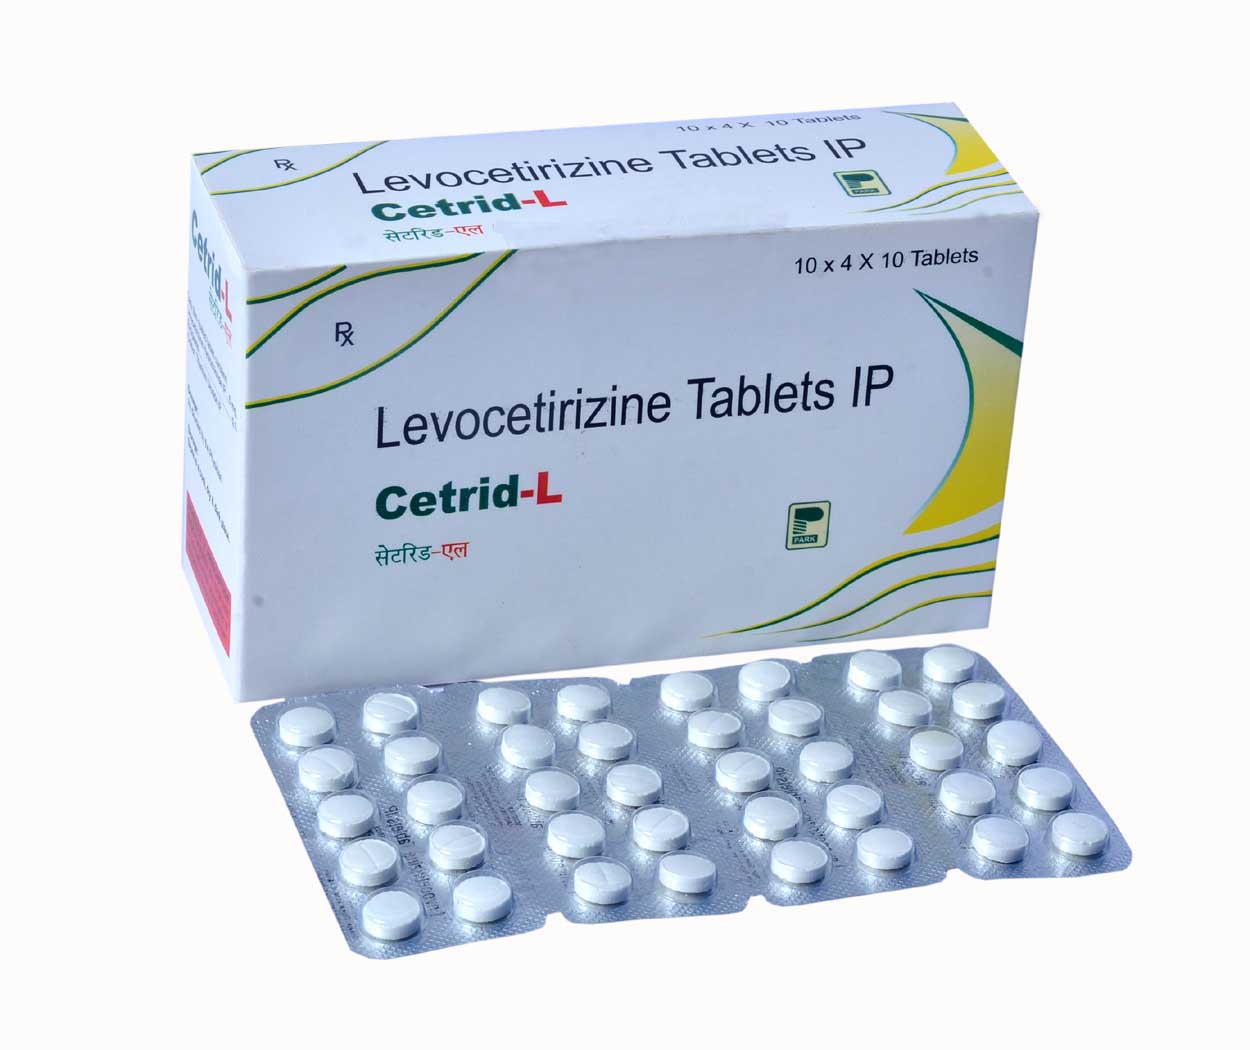 Product Name: Cetrid L, Compositions of Cetrid L are Levocetirizine Tablets IP - Park Pharmaceuticals